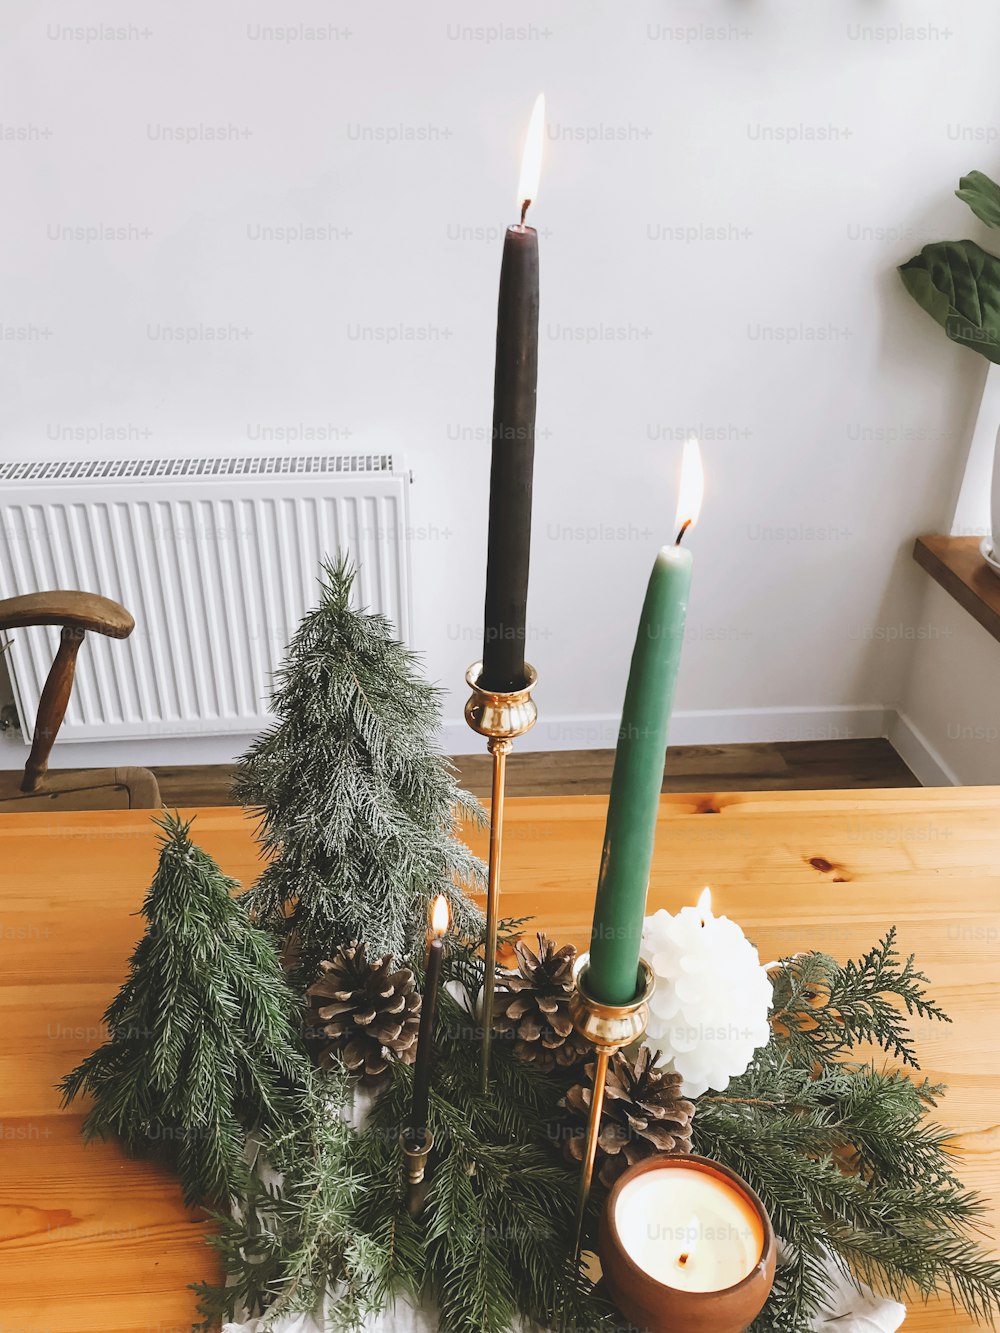 Christmas tree, candles, pine cones and fir branches on wooden table, christmas table setting and decor. Festive simple natural home decorations. Happy holidays and Merry Christmas!